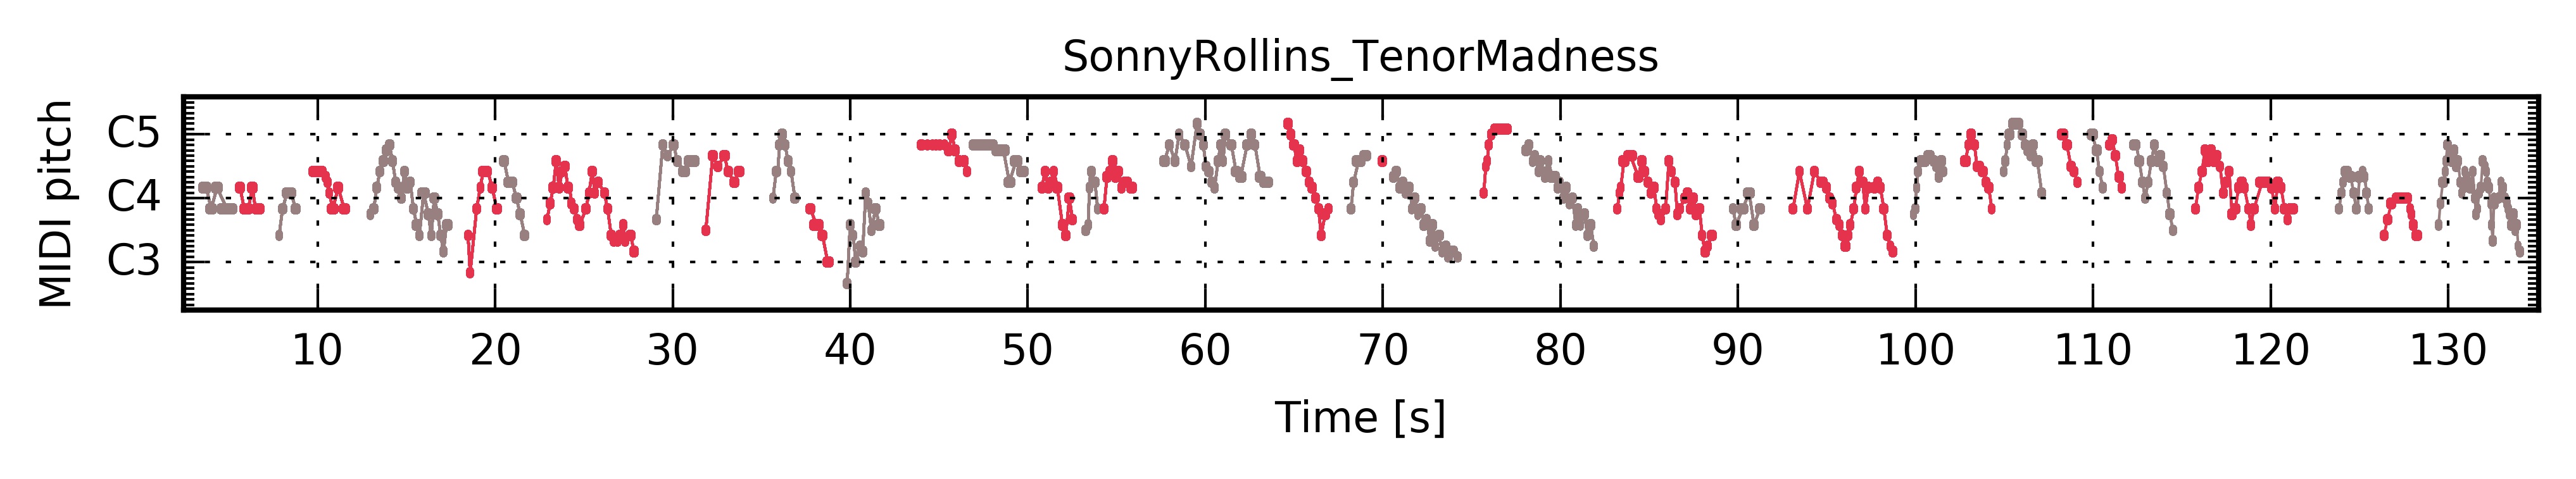 ../../_images/PianoRoll_SonnyRollins_TenorMadness.jpg